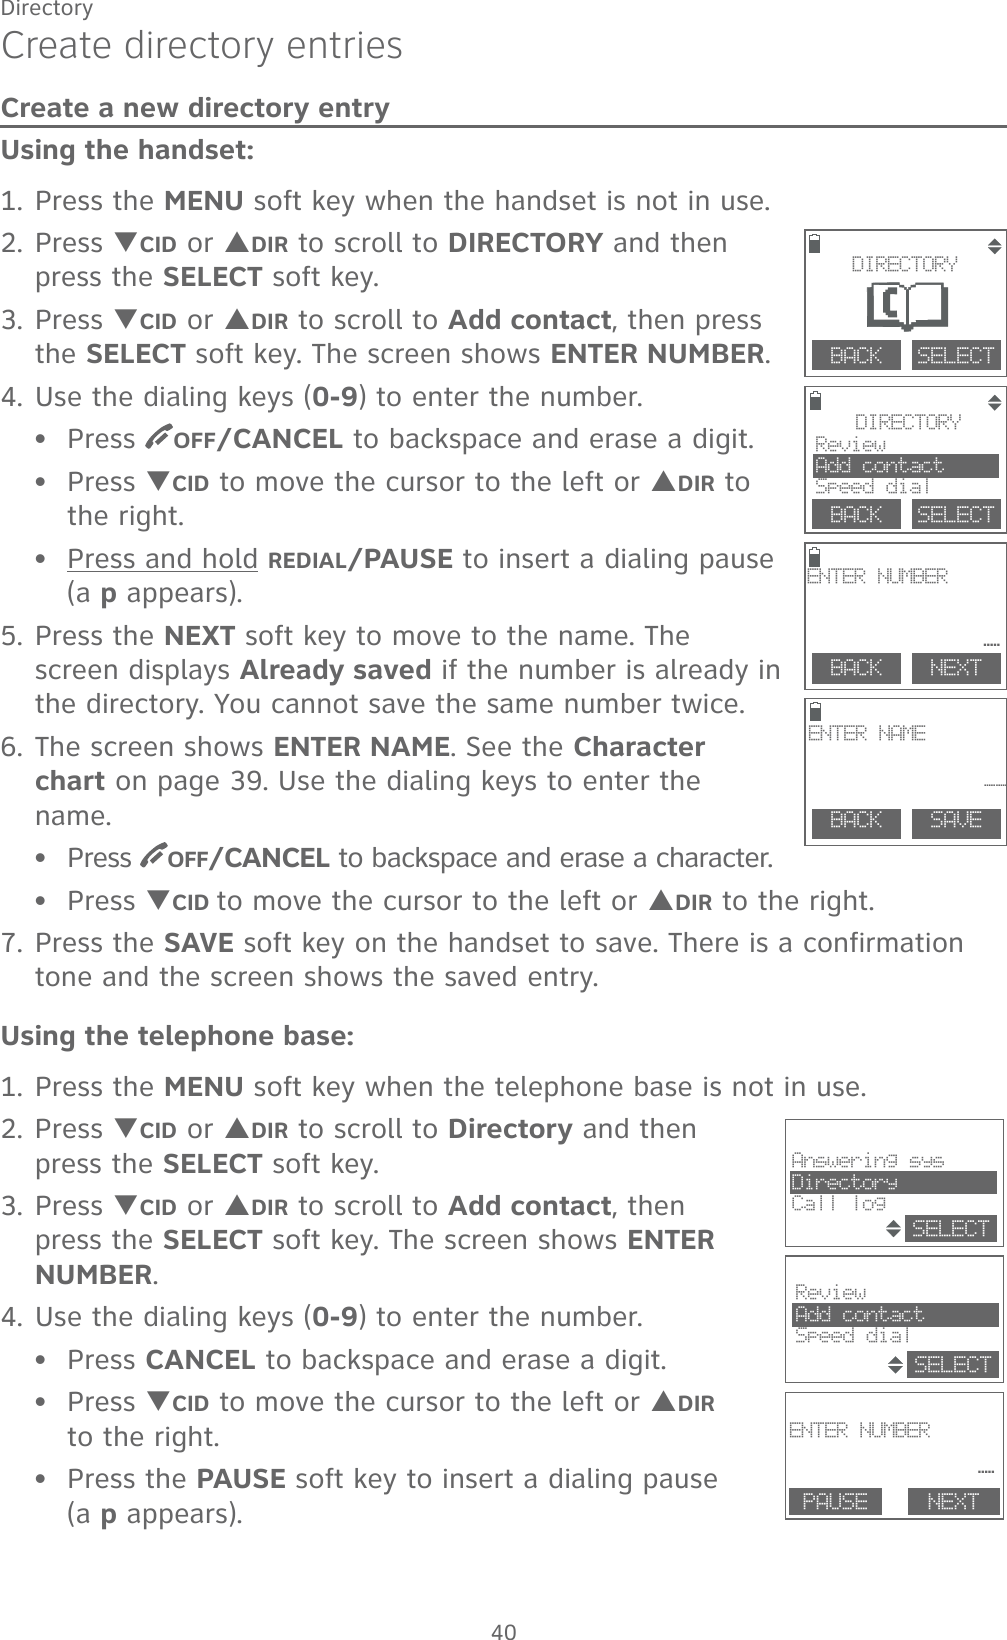 40DirectoryCreate directory entriesCreate a new directory entryUsing the handset:1. Press the MENU soft key when the handset is not in use.2. Press TCID or SDIR to scroll to DIRECTORY and then press the SELECT soft key.3. Press TCID or SDIR to scroll to Add contact, then press the SELECT soft key. The screen shows ENTER NUMBER. 4. Use the dialing keys (0-9) to enter the number.Press  OFF/CANCEL to backspace and erase a digit.Press TCID to move the cursor to the left or SDIR to the right.Press and hold REDIAL/PAUSE to insert a dialing pause (a p appears).5. Press the NEXT soft key to move to the name. The screen displays Already saved if the number is already in the directory. You cannot save the same number twice. 6. The screen shows ENTER NAME. See the Character chart on page 39. Use the dialing keys to enter the name.Press  OFF/CANCEL to backspace and erase a character.Press TCID to move the cursor to the left or SDIR to the right.7. Press the SAVE soft key on the handset to save. There is a confirmation tone and the screen shows the saved entry.Using the telephone base:1. Press the MENU soft key when the telephone base is not in use.2. Press TCID or SDIR to scroll to Directory and then press the SELECT soft key.3. Press TCID or SDIR to scroll to Add contact, then press the SELECT soft key. The screen shows ENTER NUMBER. 4. Use the dialing keys (0-9) to enter the number.Press CANCEL to backspace and erase a digit.Press TCID to move the cursor to the left or SDIR  to the right.Press the PAUSE soft key to insert a dialing pause  (a p appears).••••••••        DIRECTORYReviewAdd contactSpeed dialBACK    SELECT                BACK    SELECTDIRECTORYBACK    SAVEENTER NAME__        BACK    NEXTENTER NUMBER_                                                                     ENTER NUMBER _ PAUSE NEXTReviewAdd contactSpeed dialSELECTAnswering sysDirectoryCall logSELECT